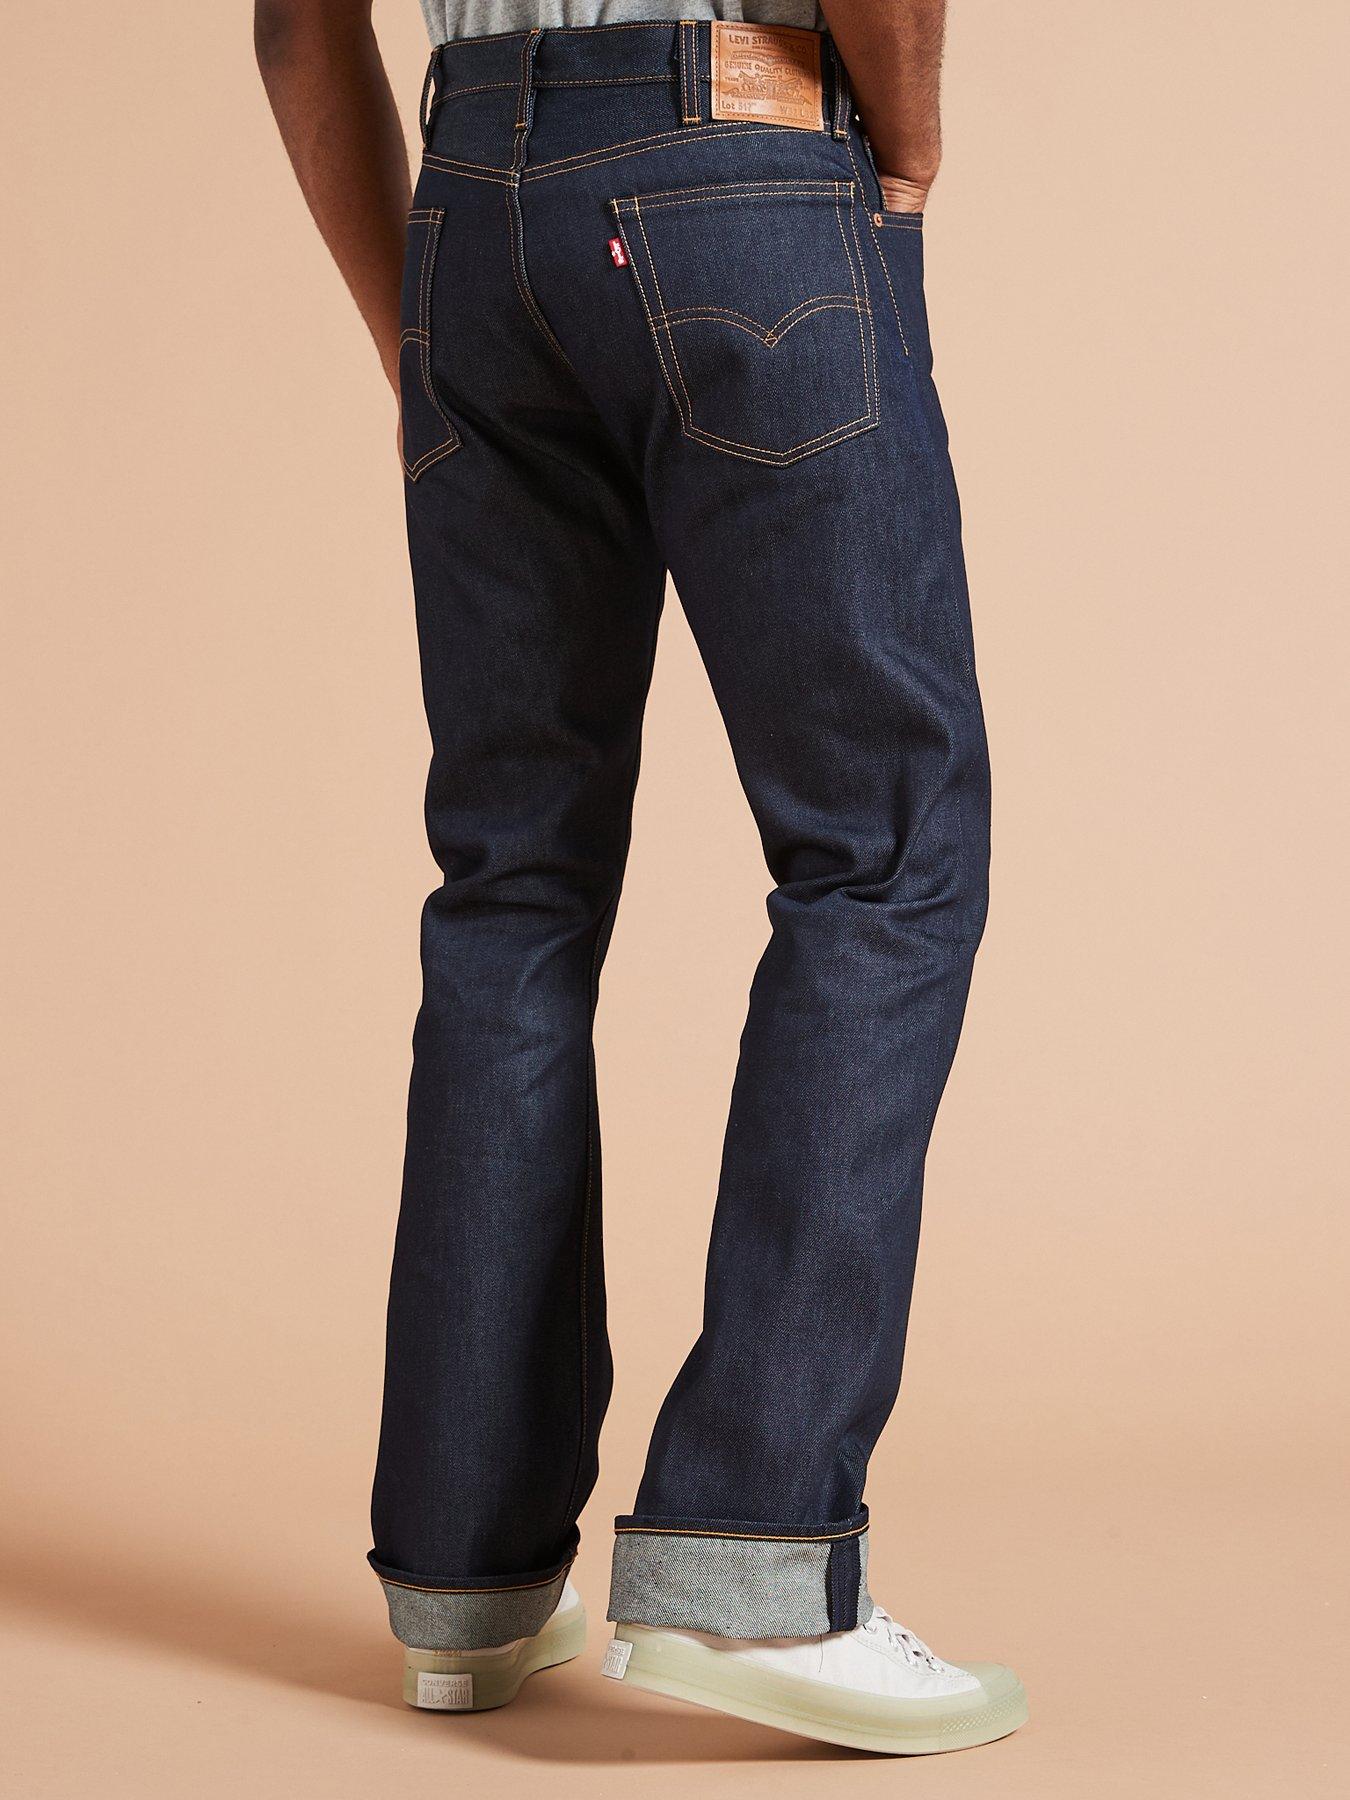 Levi's 517 Straight Bootcut Jeans - Make It Yours - Dark Blue